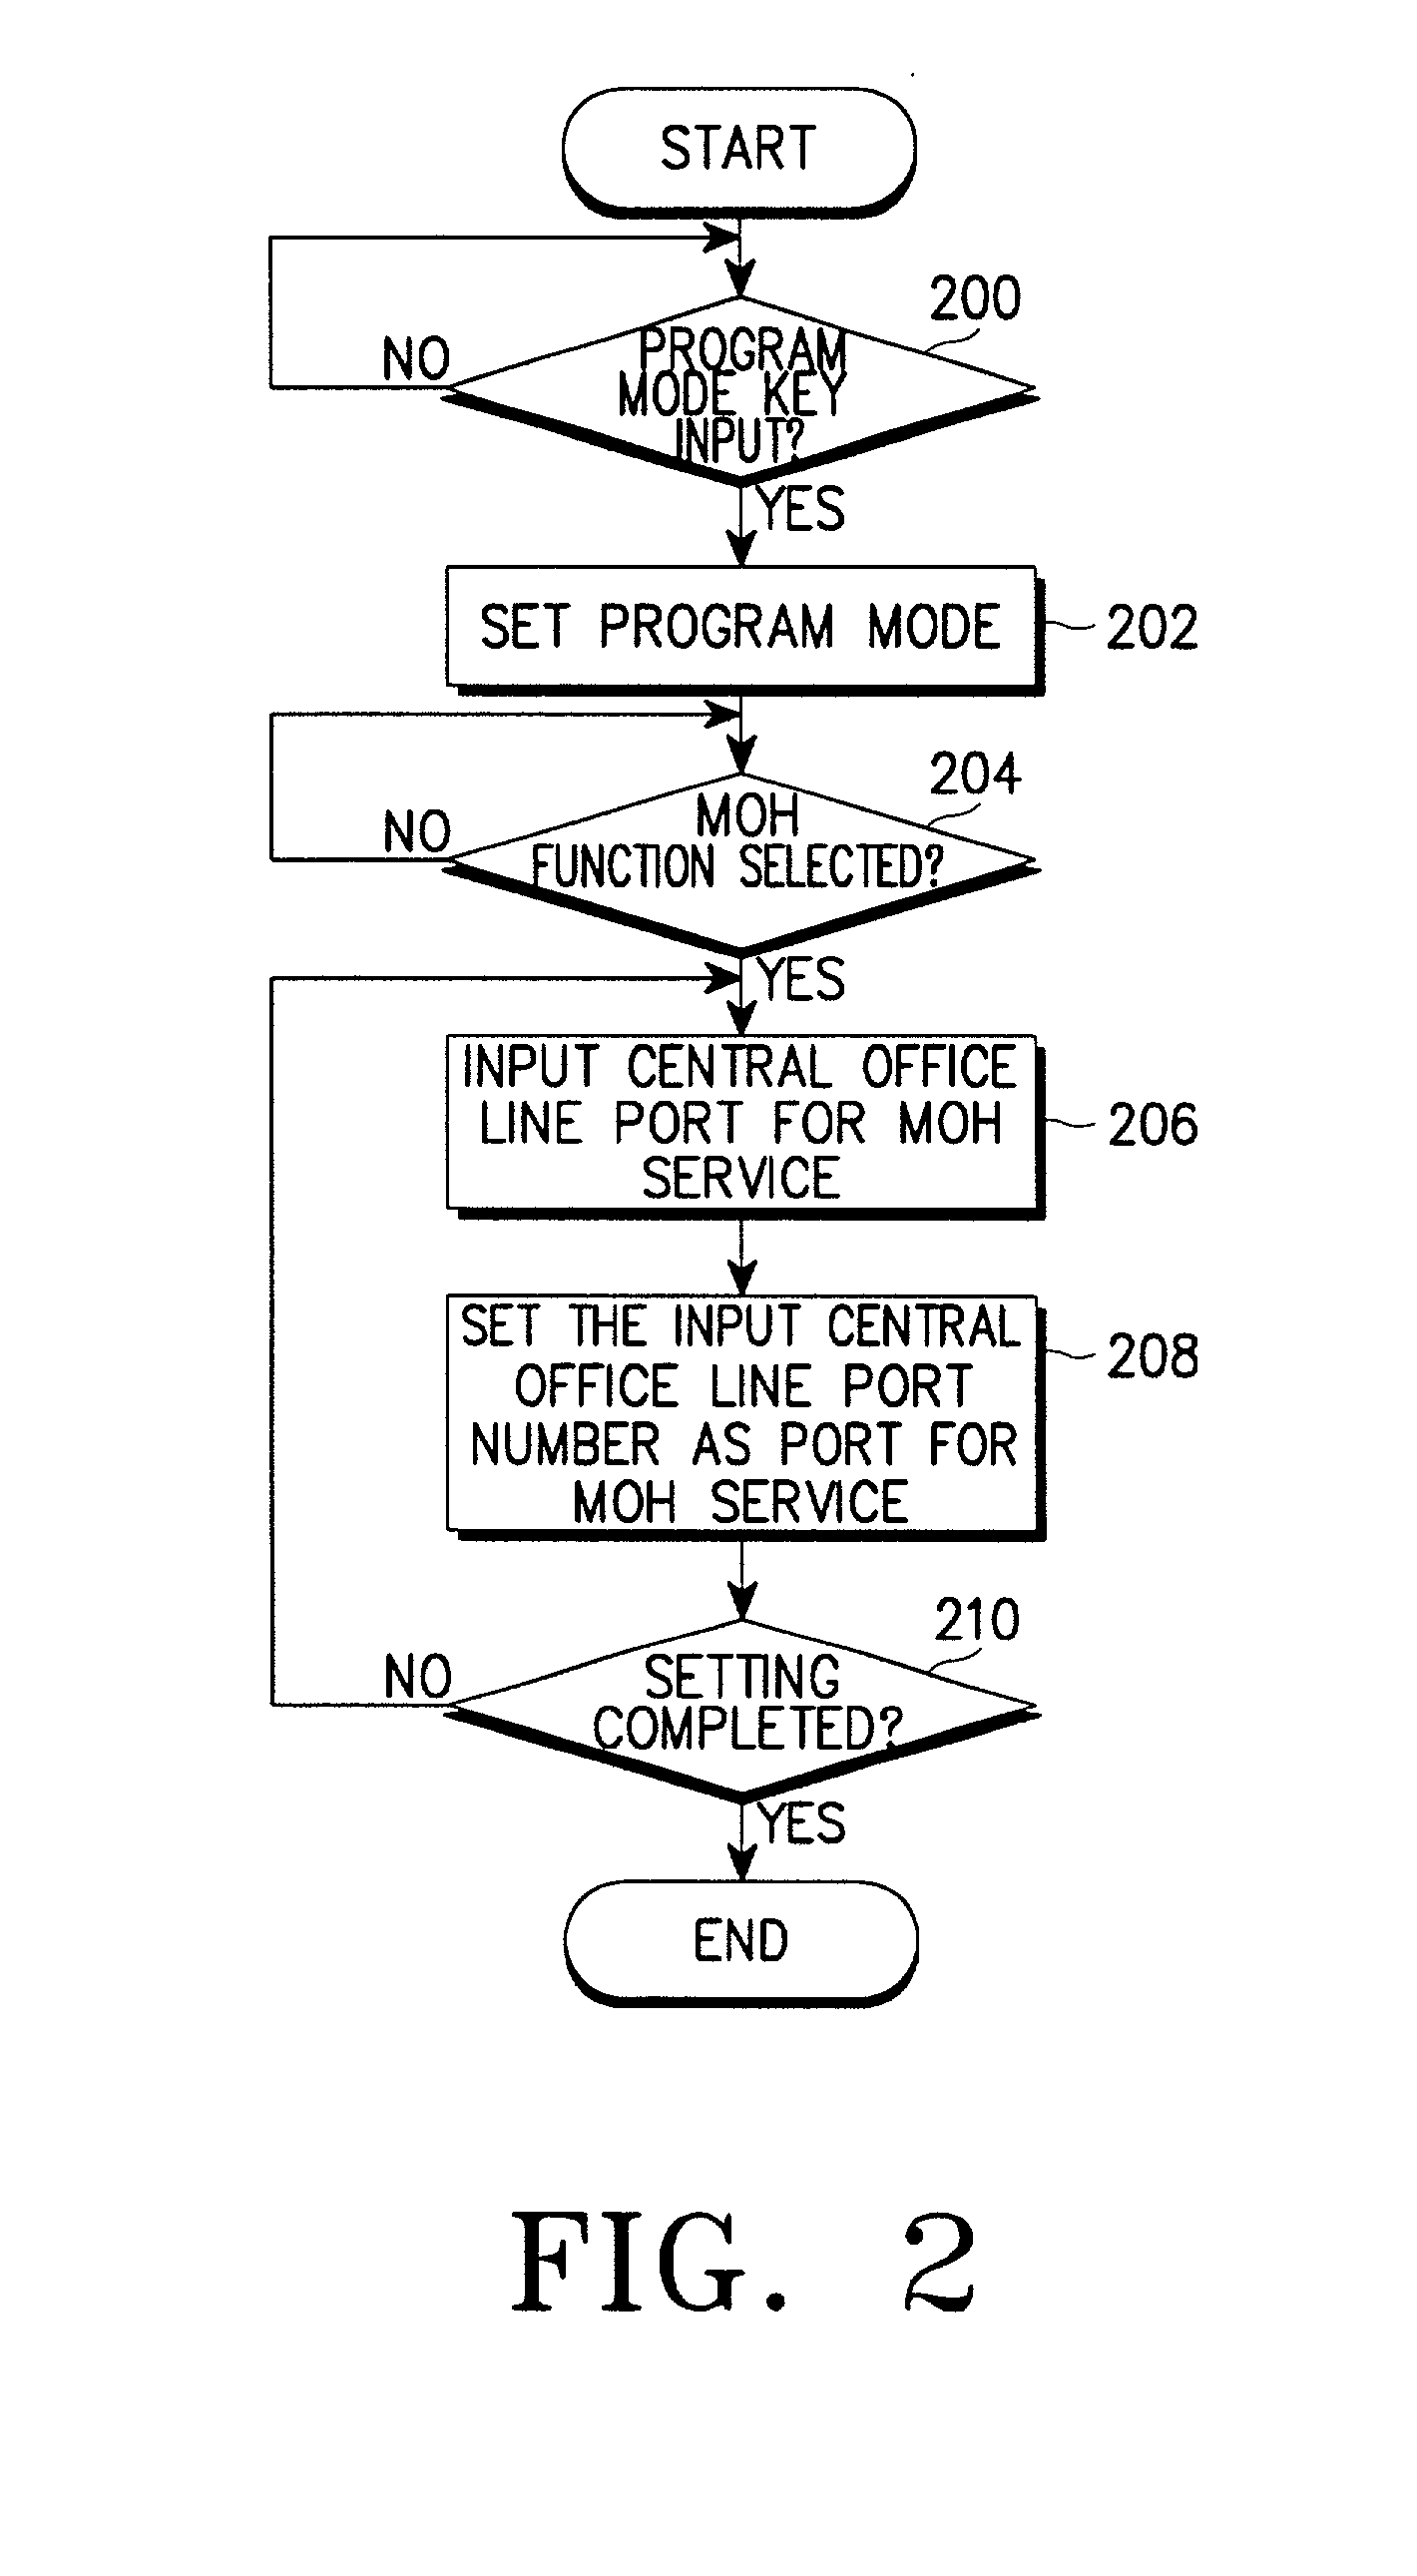 Apparatus and method for providing music-on-hold service in key telephone system